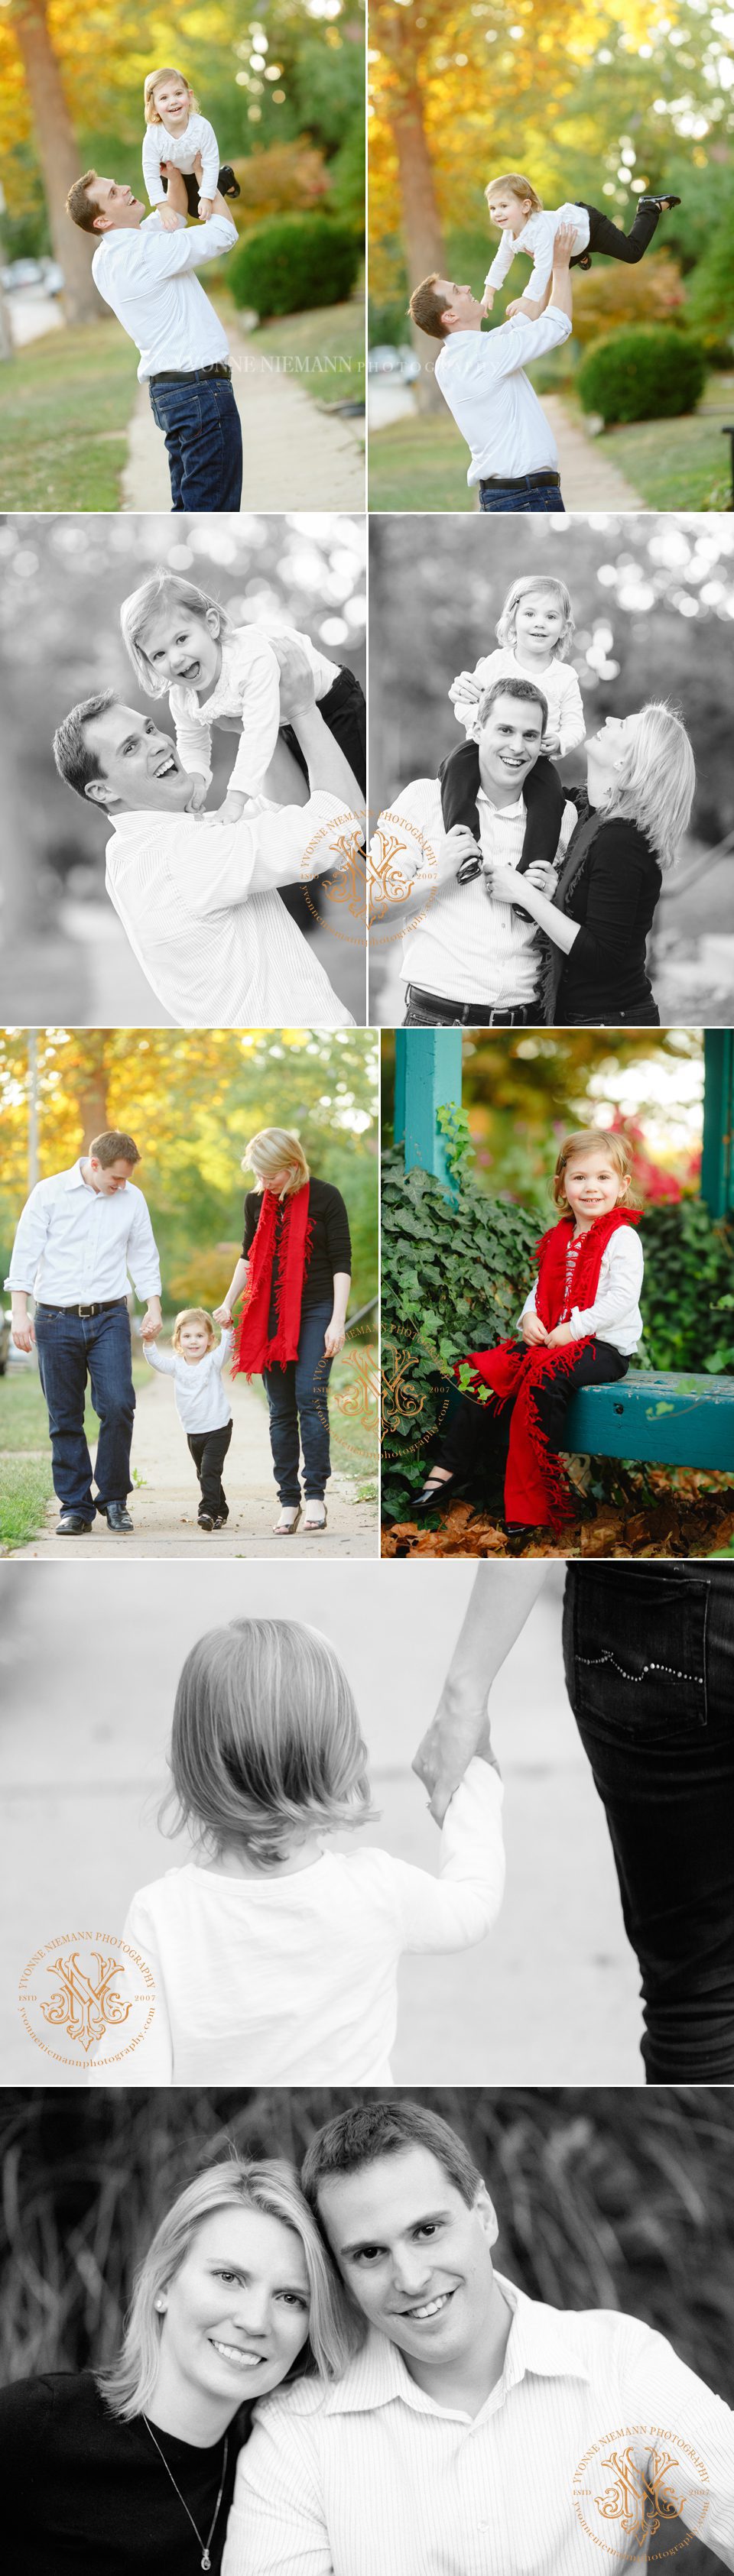 Authentic family photography by Yvonne Niemann Photography in University City, MO.